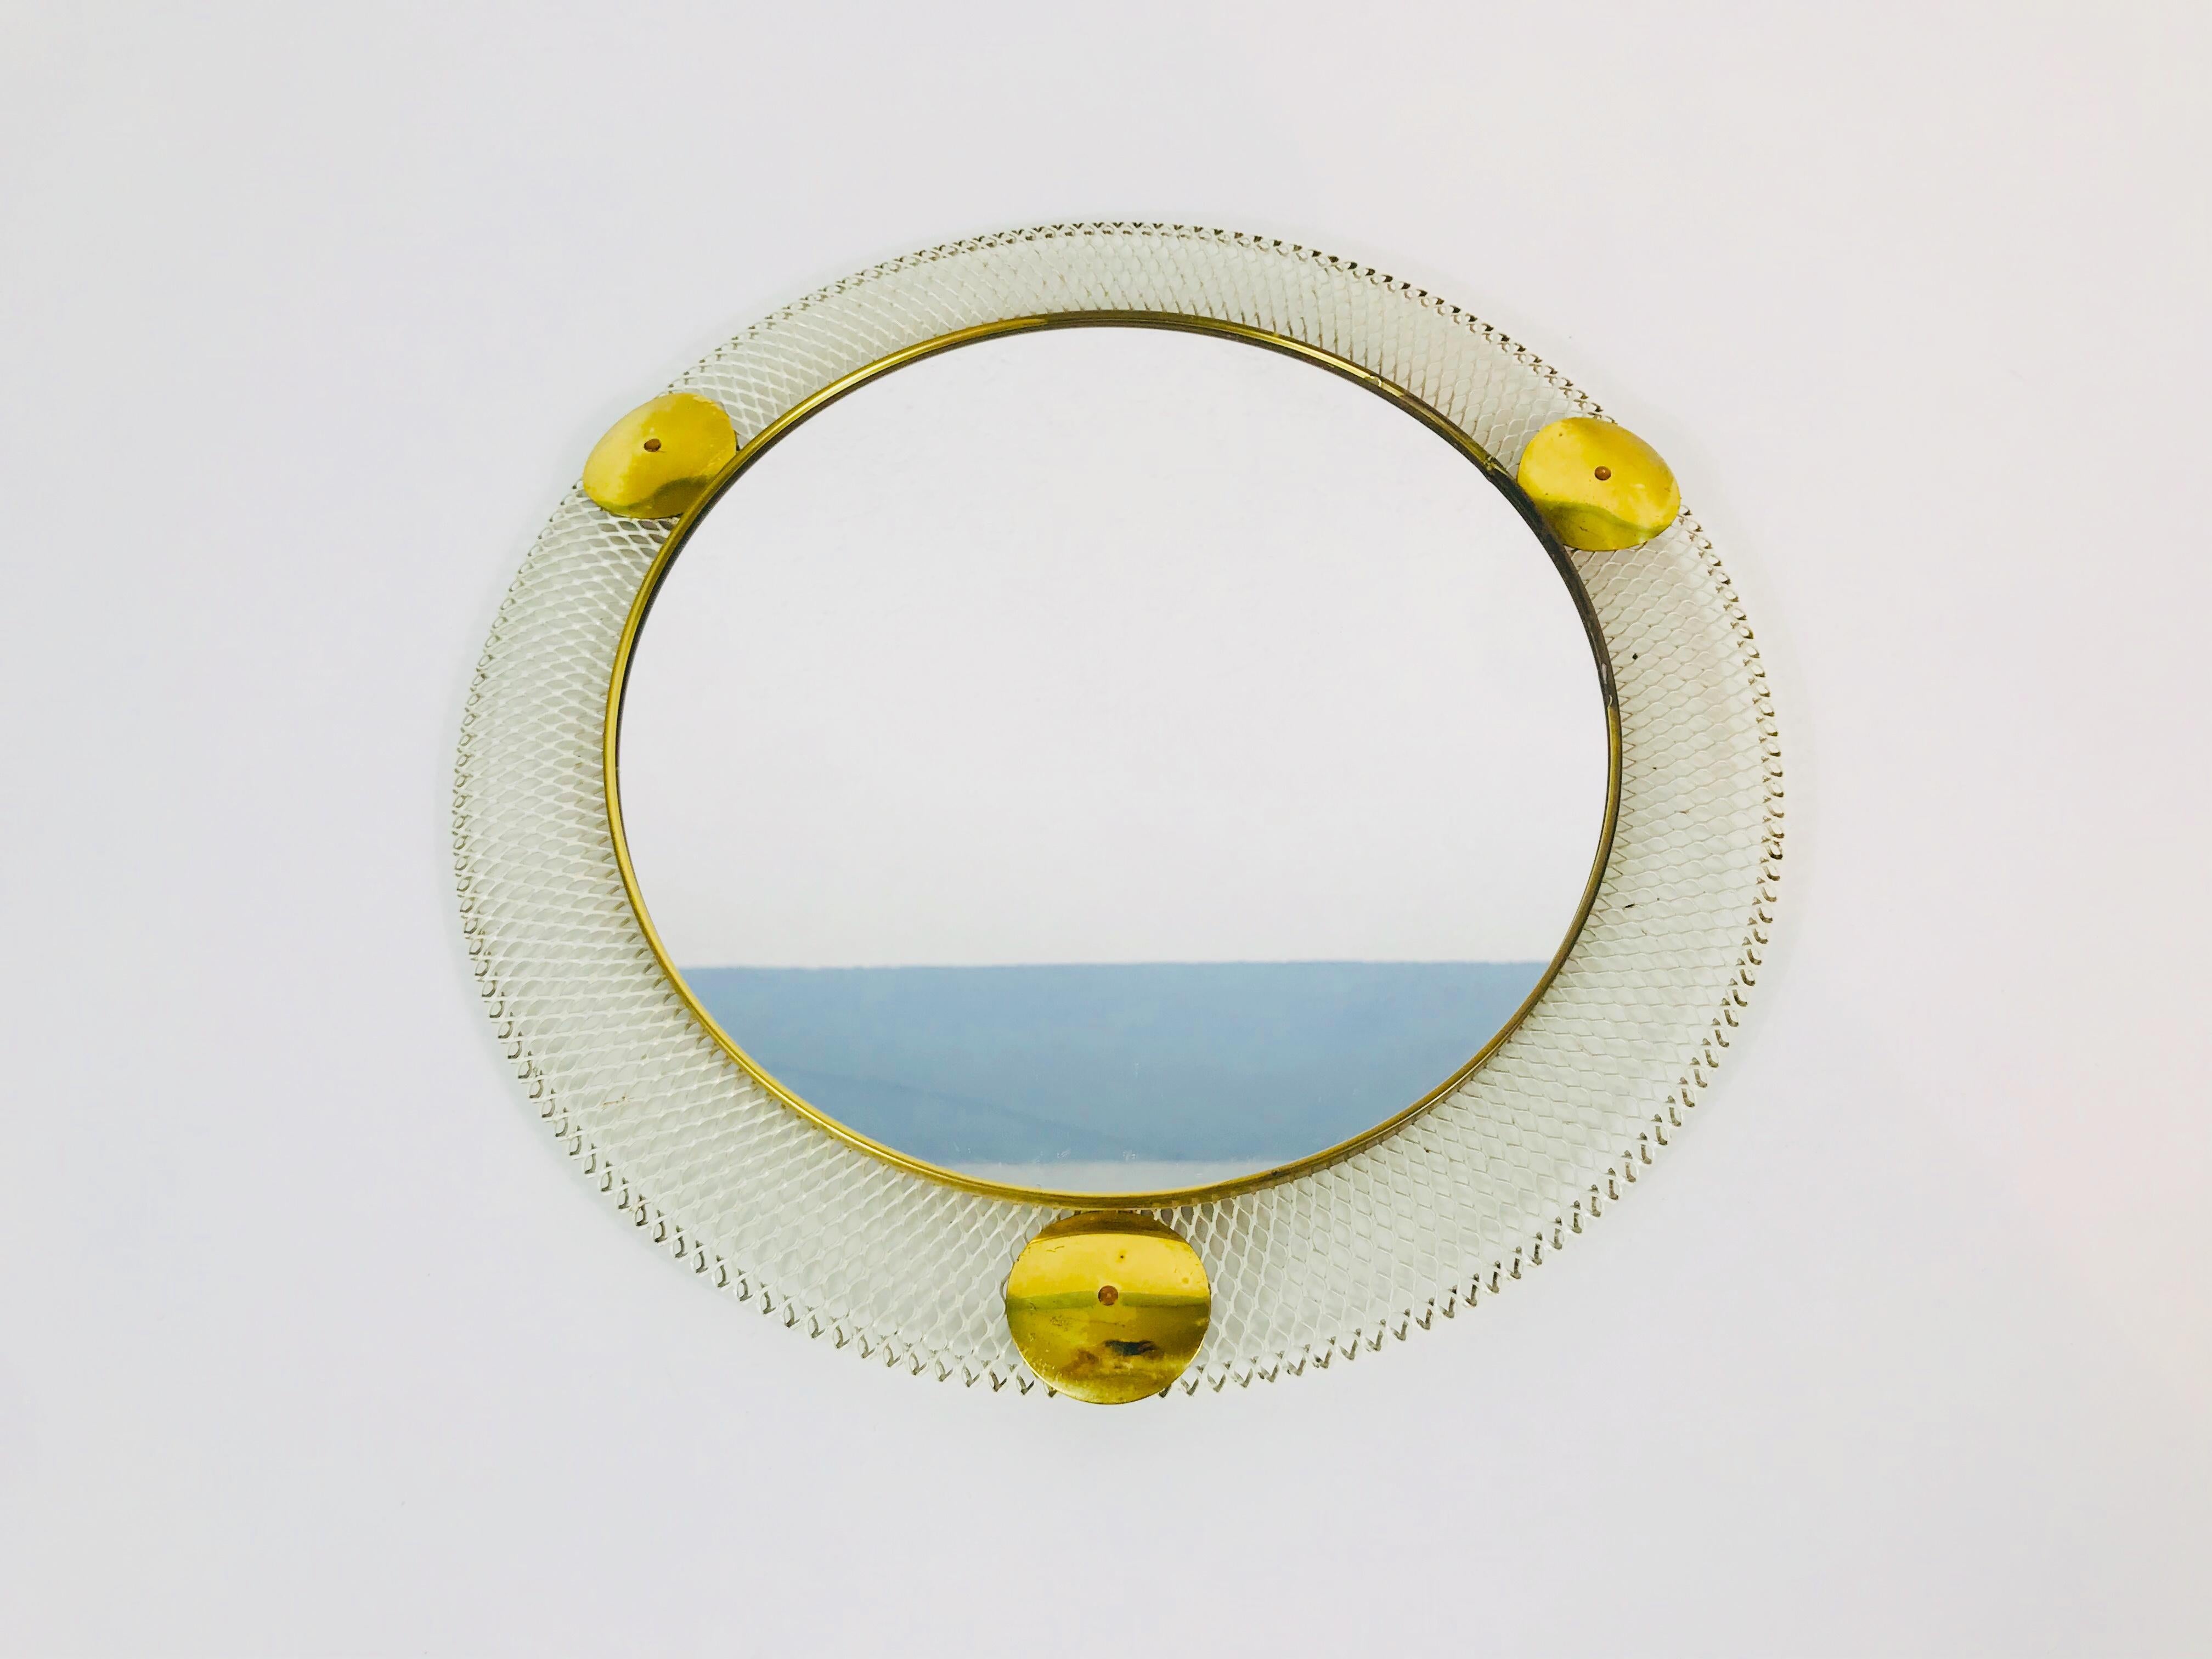 A round wall mirror from the 1960s made in Italy. The mirror has a circular metal design. The mirror is in a good vintage condition.